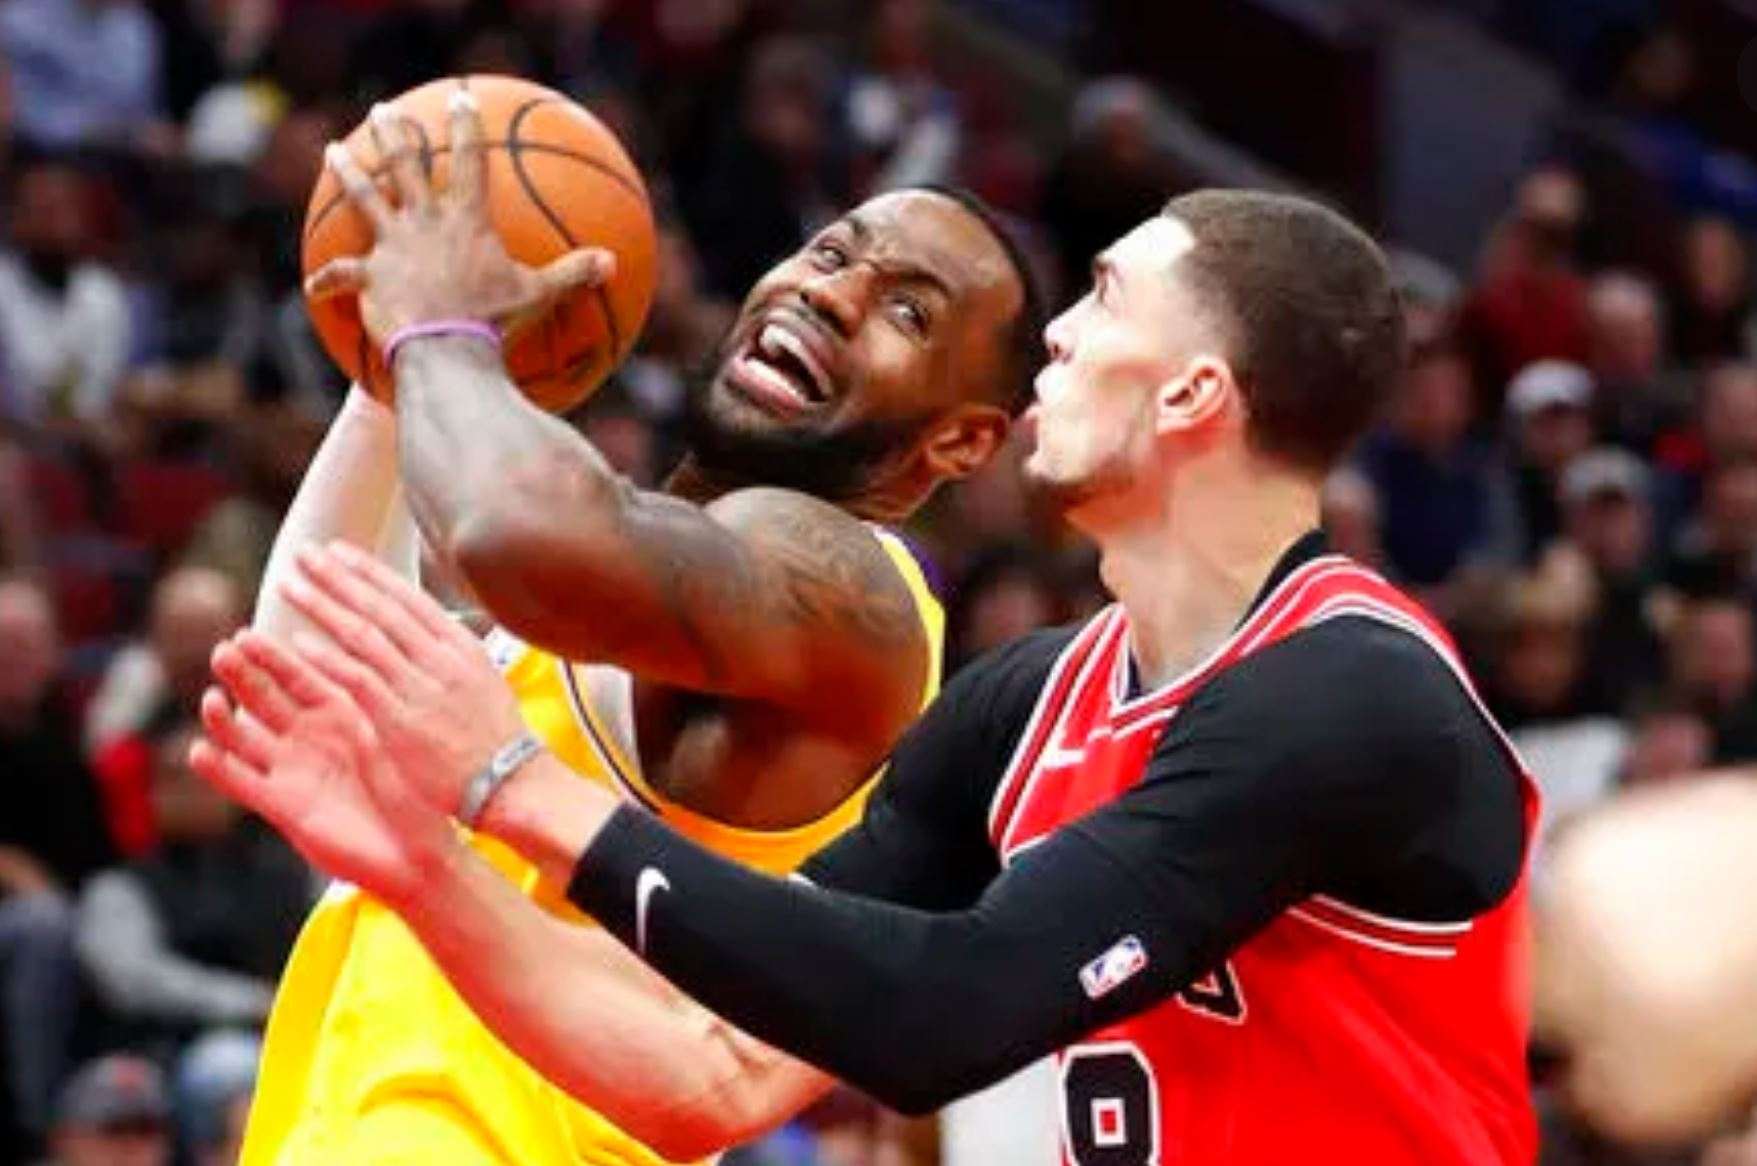 GAME DAY PREVIEW: Can the Lakers Extend Road Win Streak Versus Bulls?